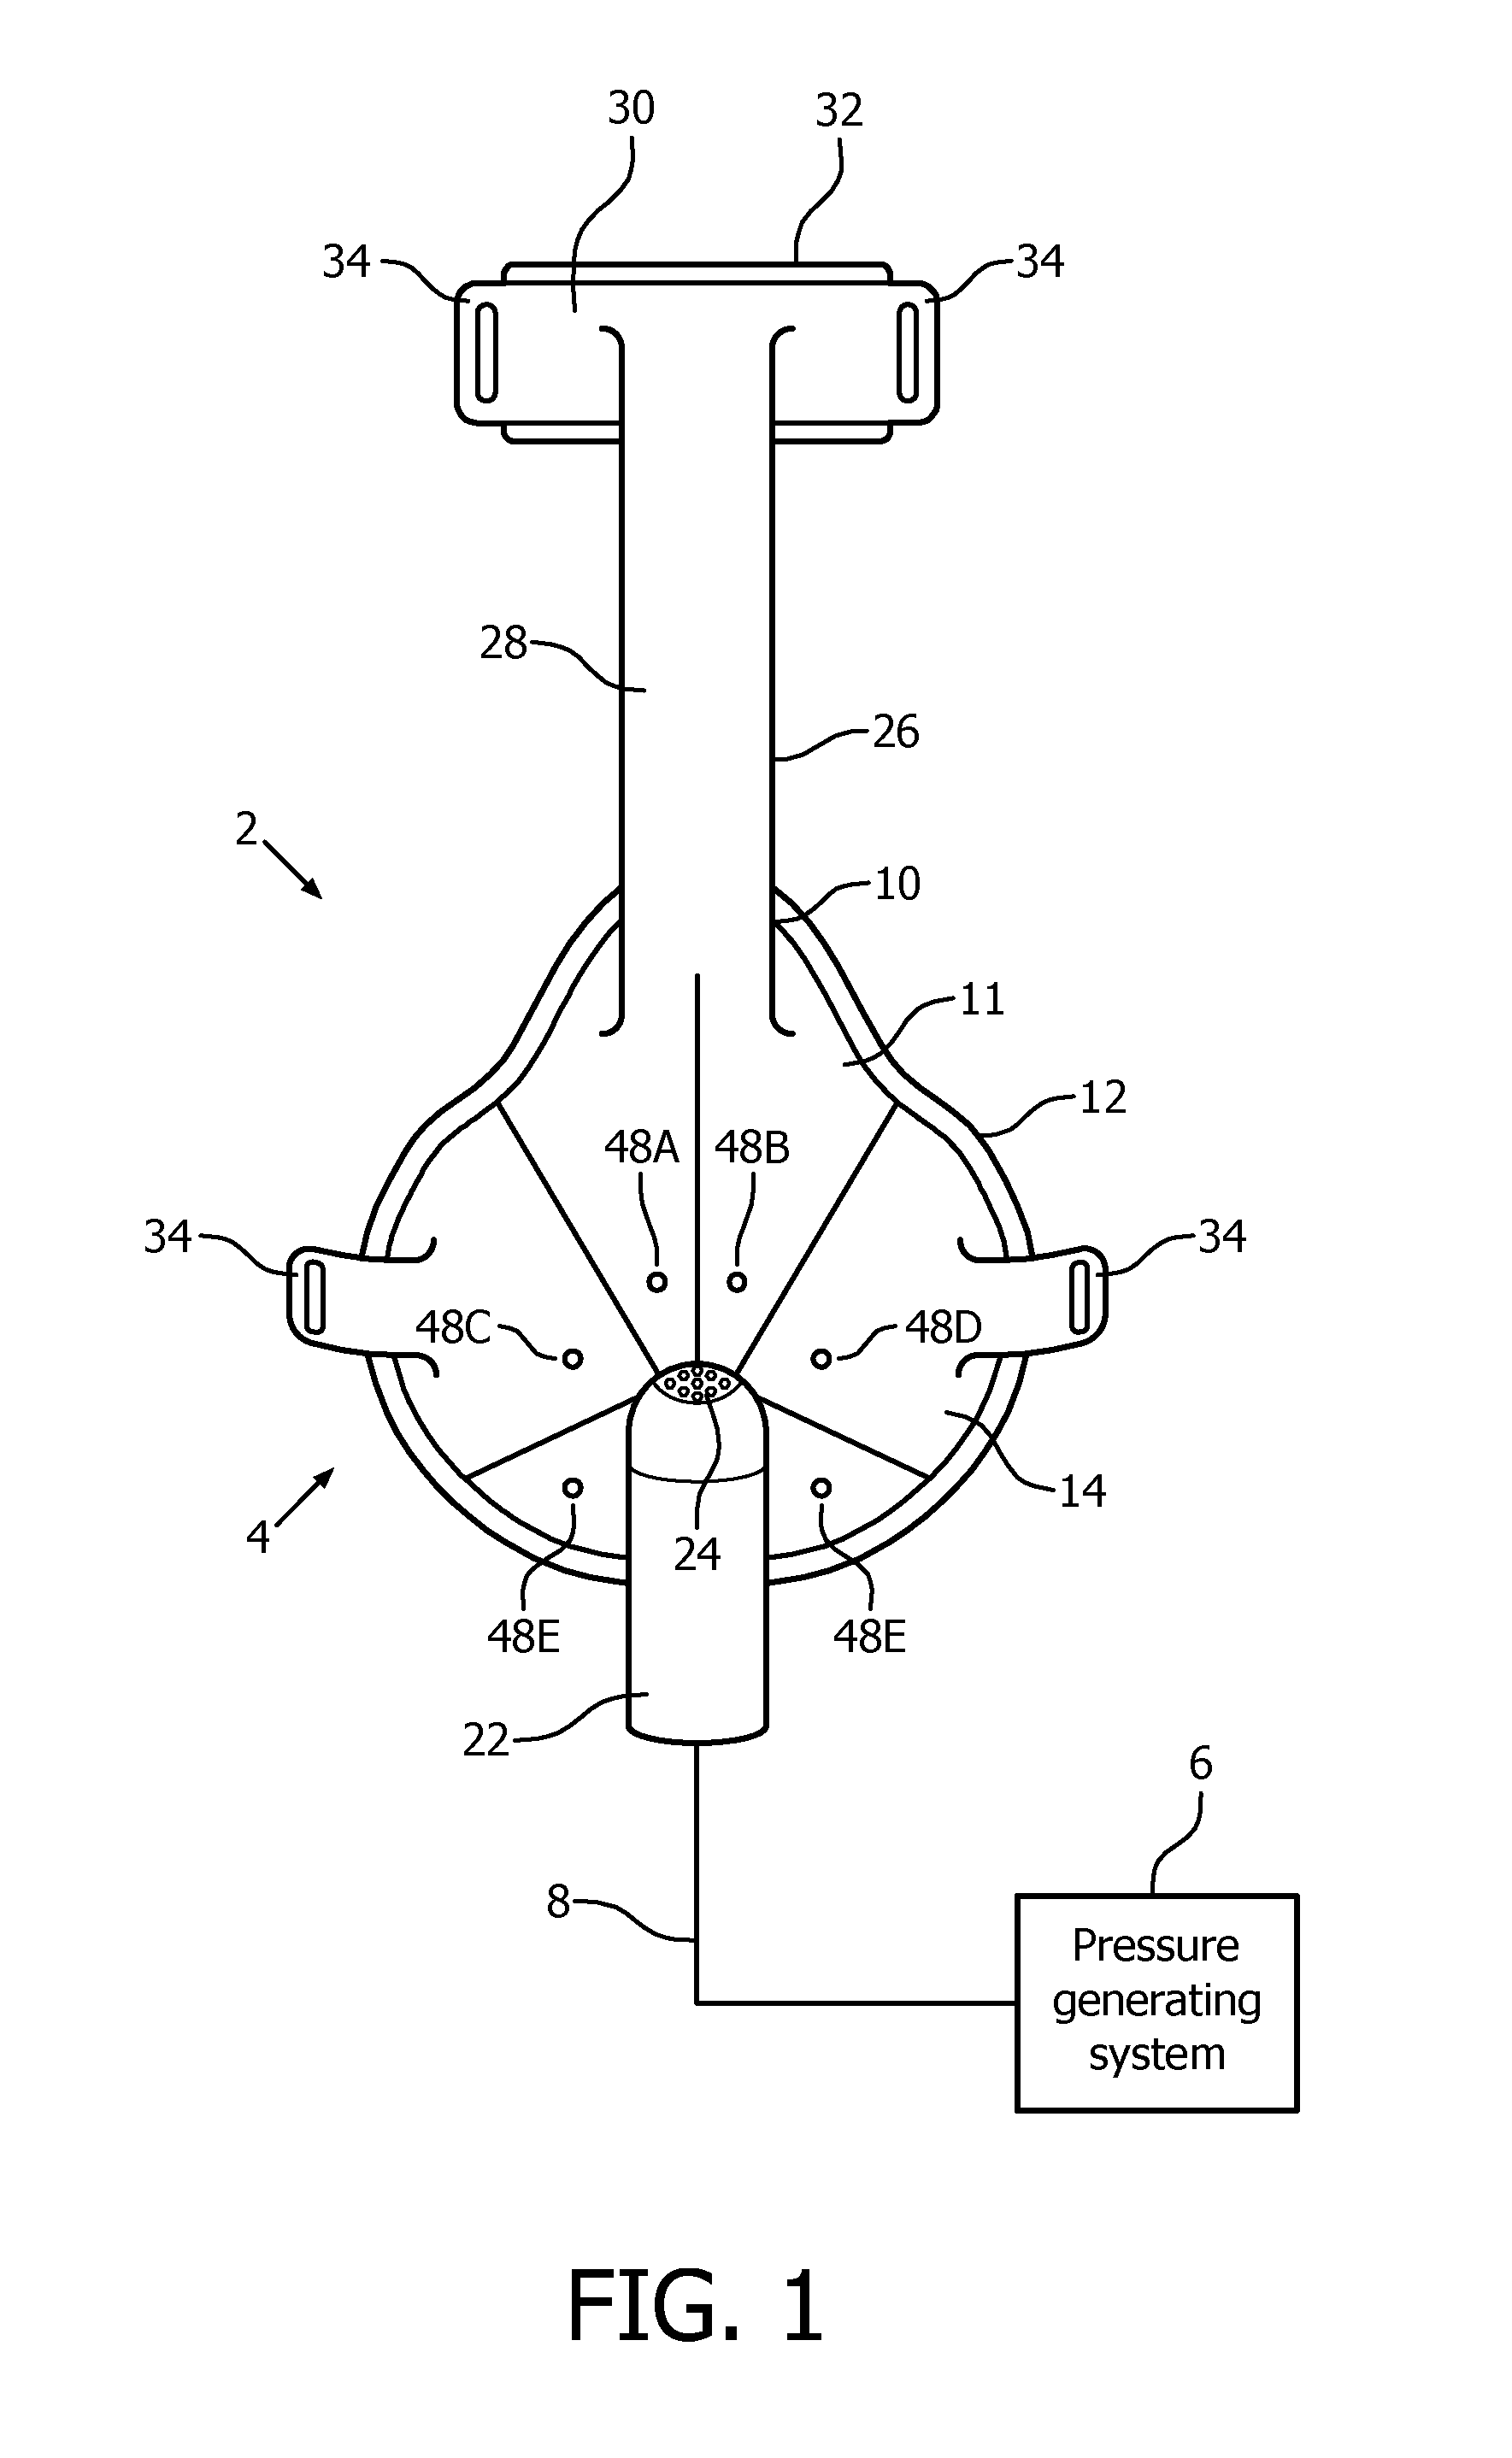 User interface device providing for improved cooling of the skin